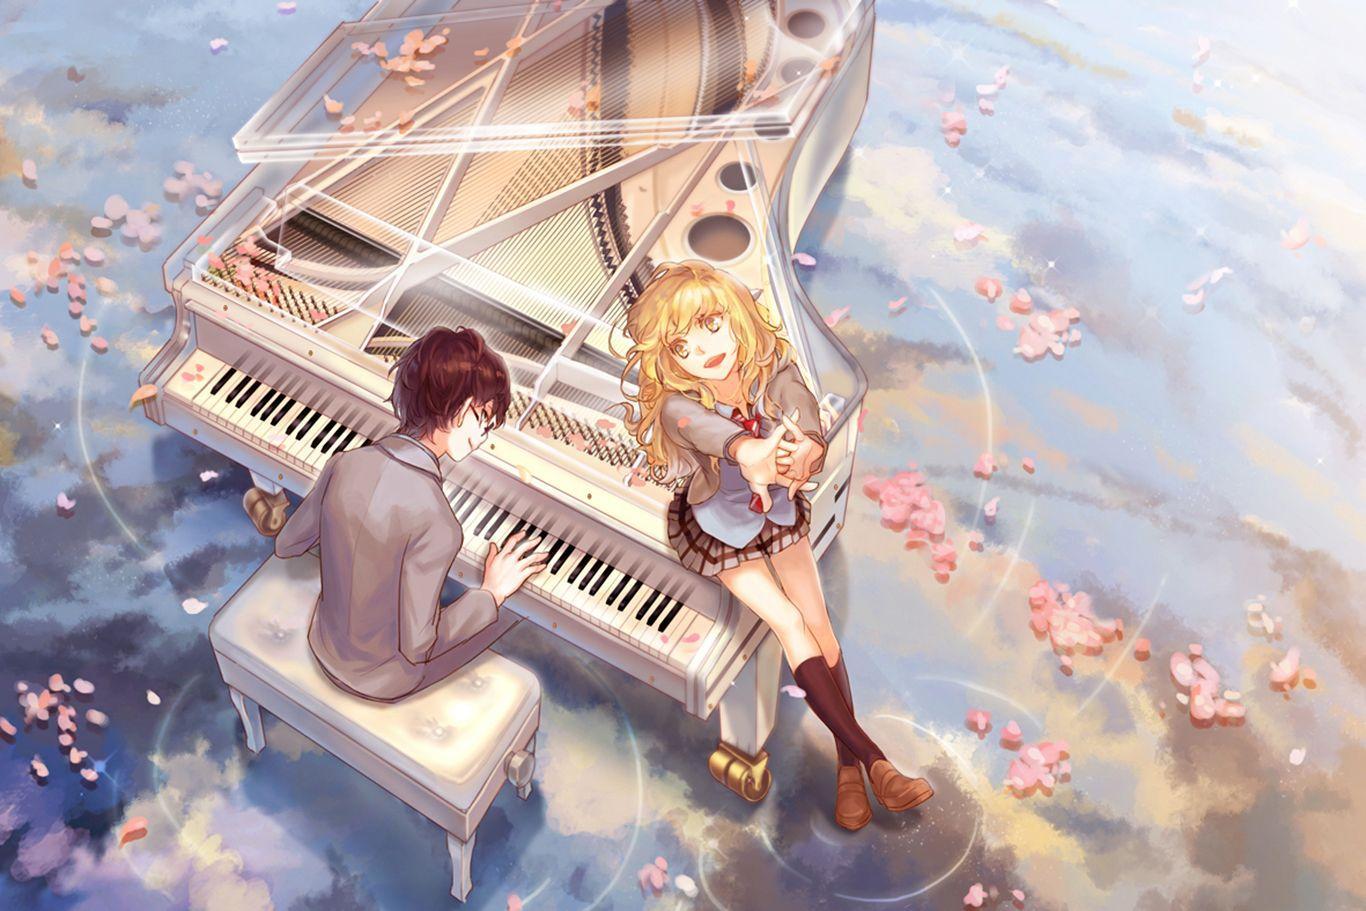 Your Lie in April HD Wallpapers - Top